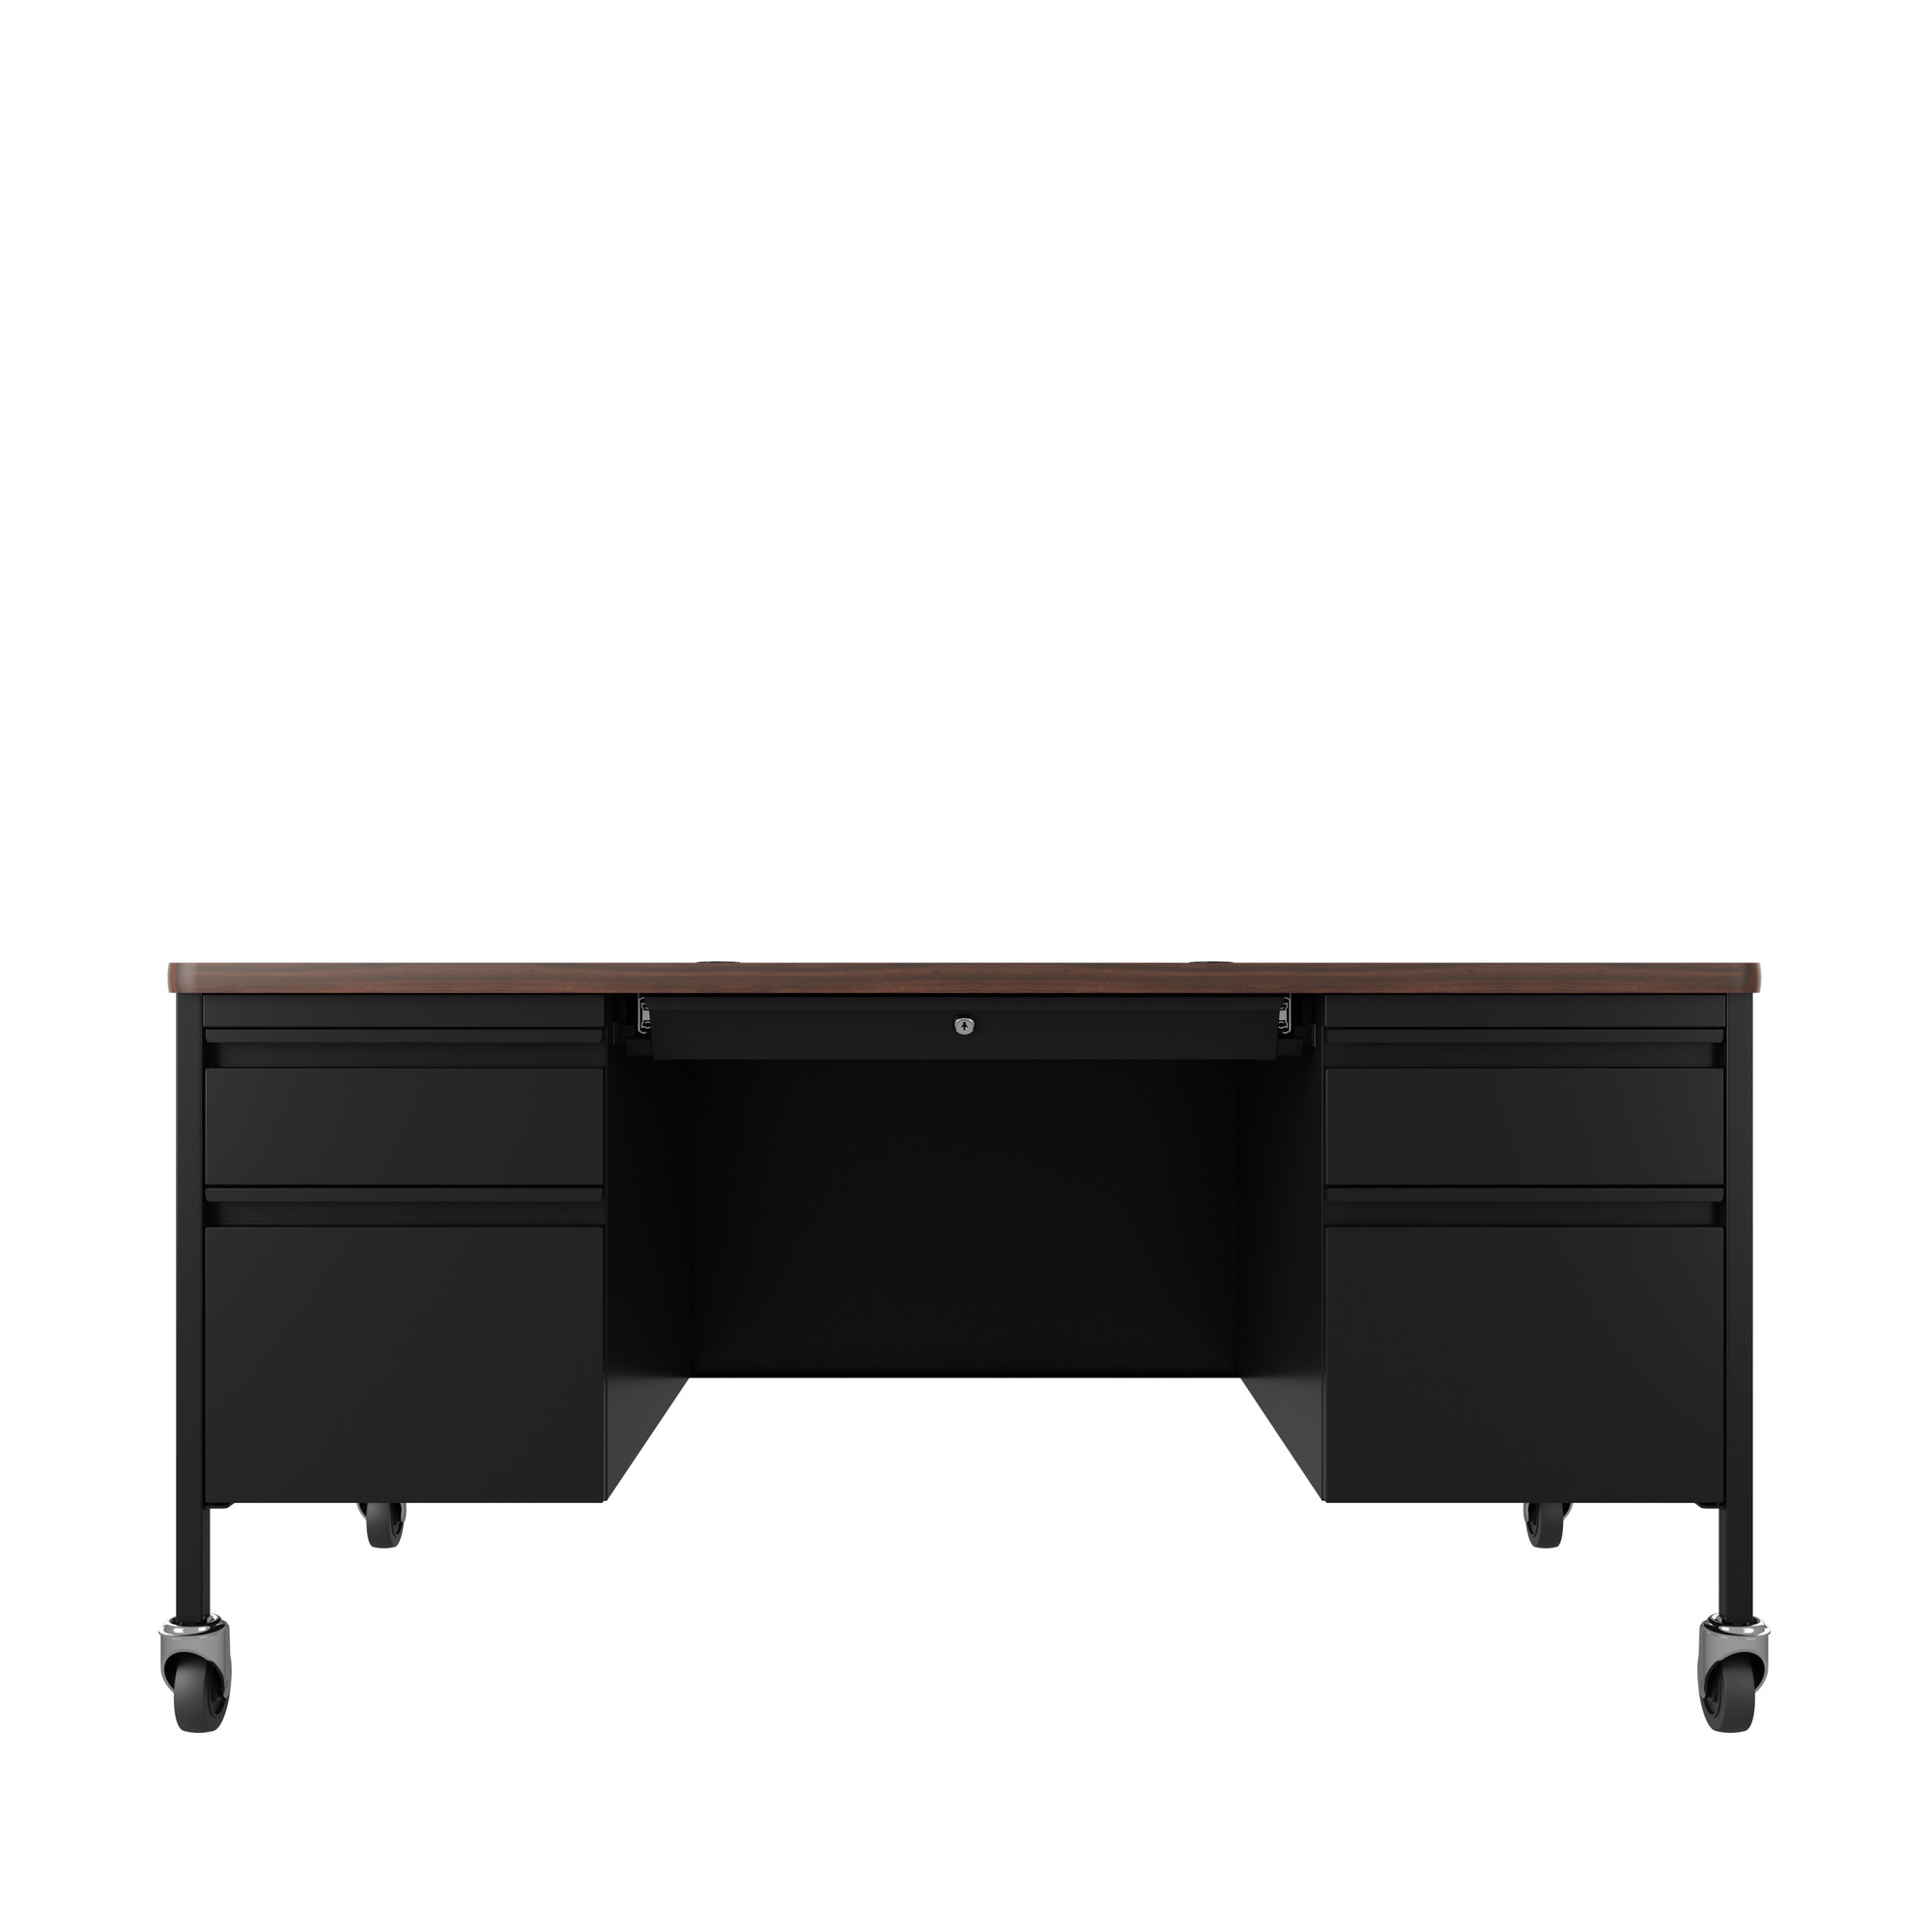 Hirsh Industries, Double Ped File Desk w/ Rounded Corner T-Mold Top, Width 60 in, Height 29.5 in, Depth 30 in, Model 22658